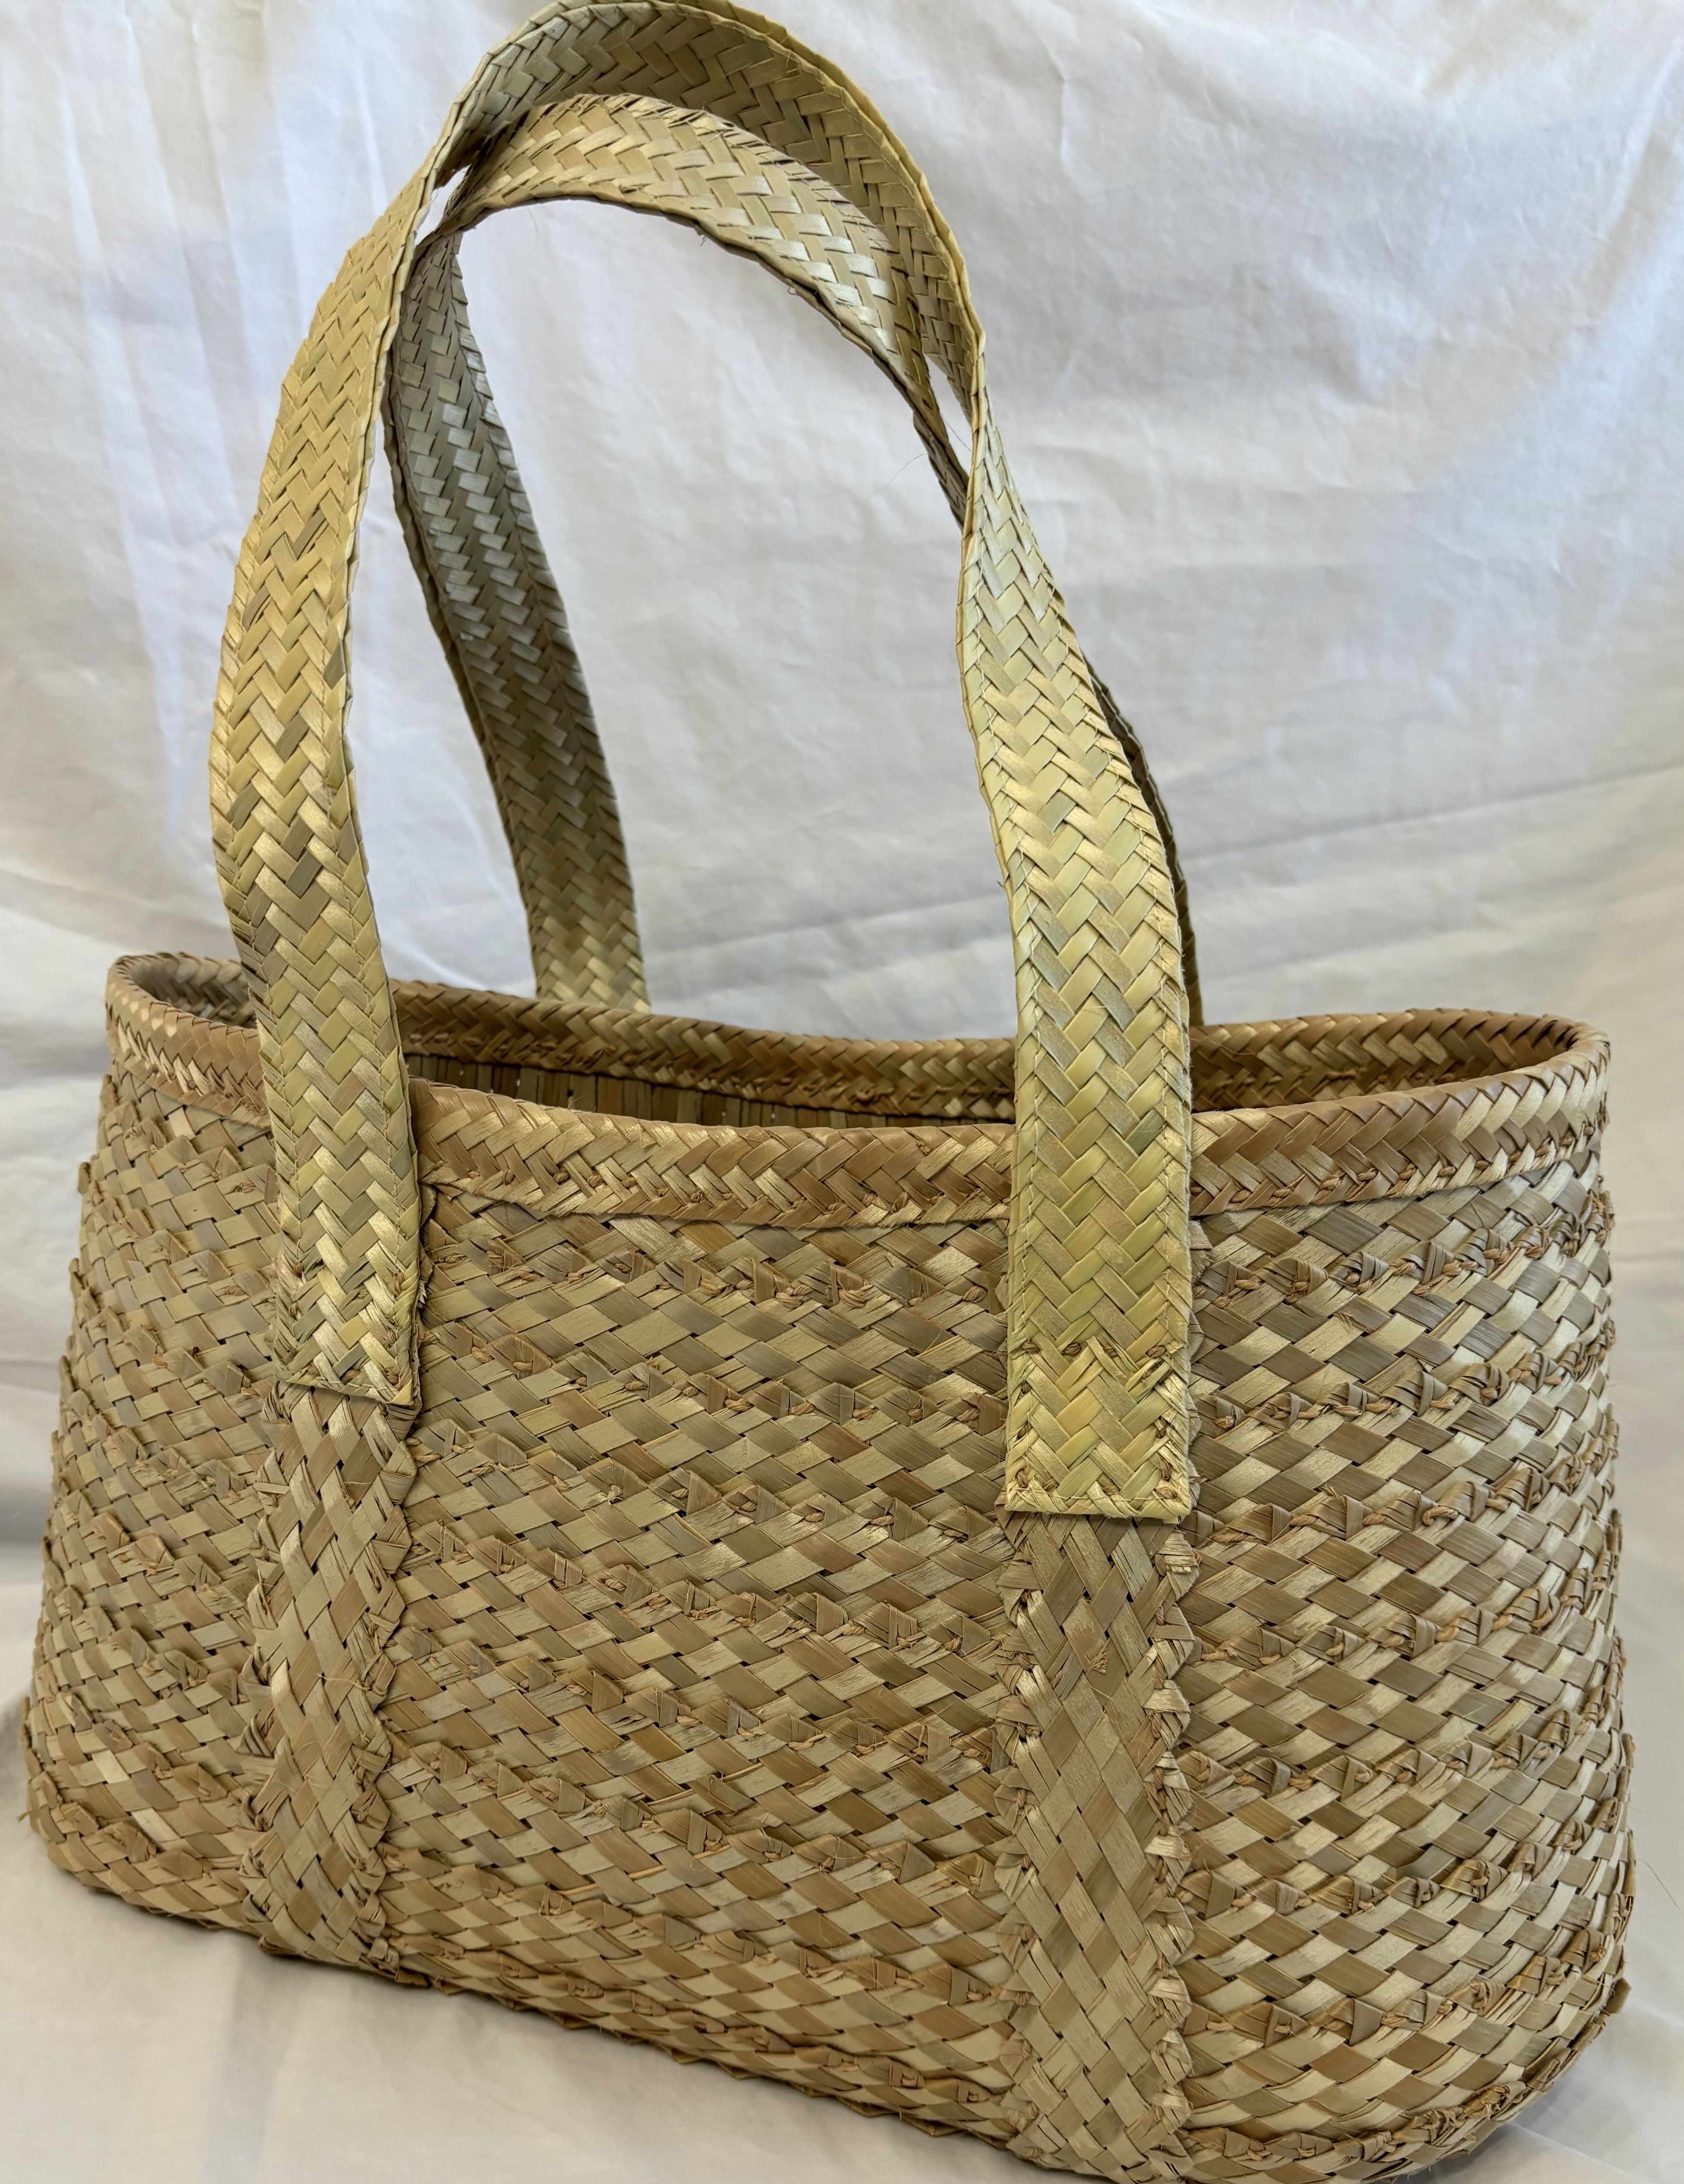 Handmade One-Of-a-Kind Thatched Basket #1 - Click Image to Close